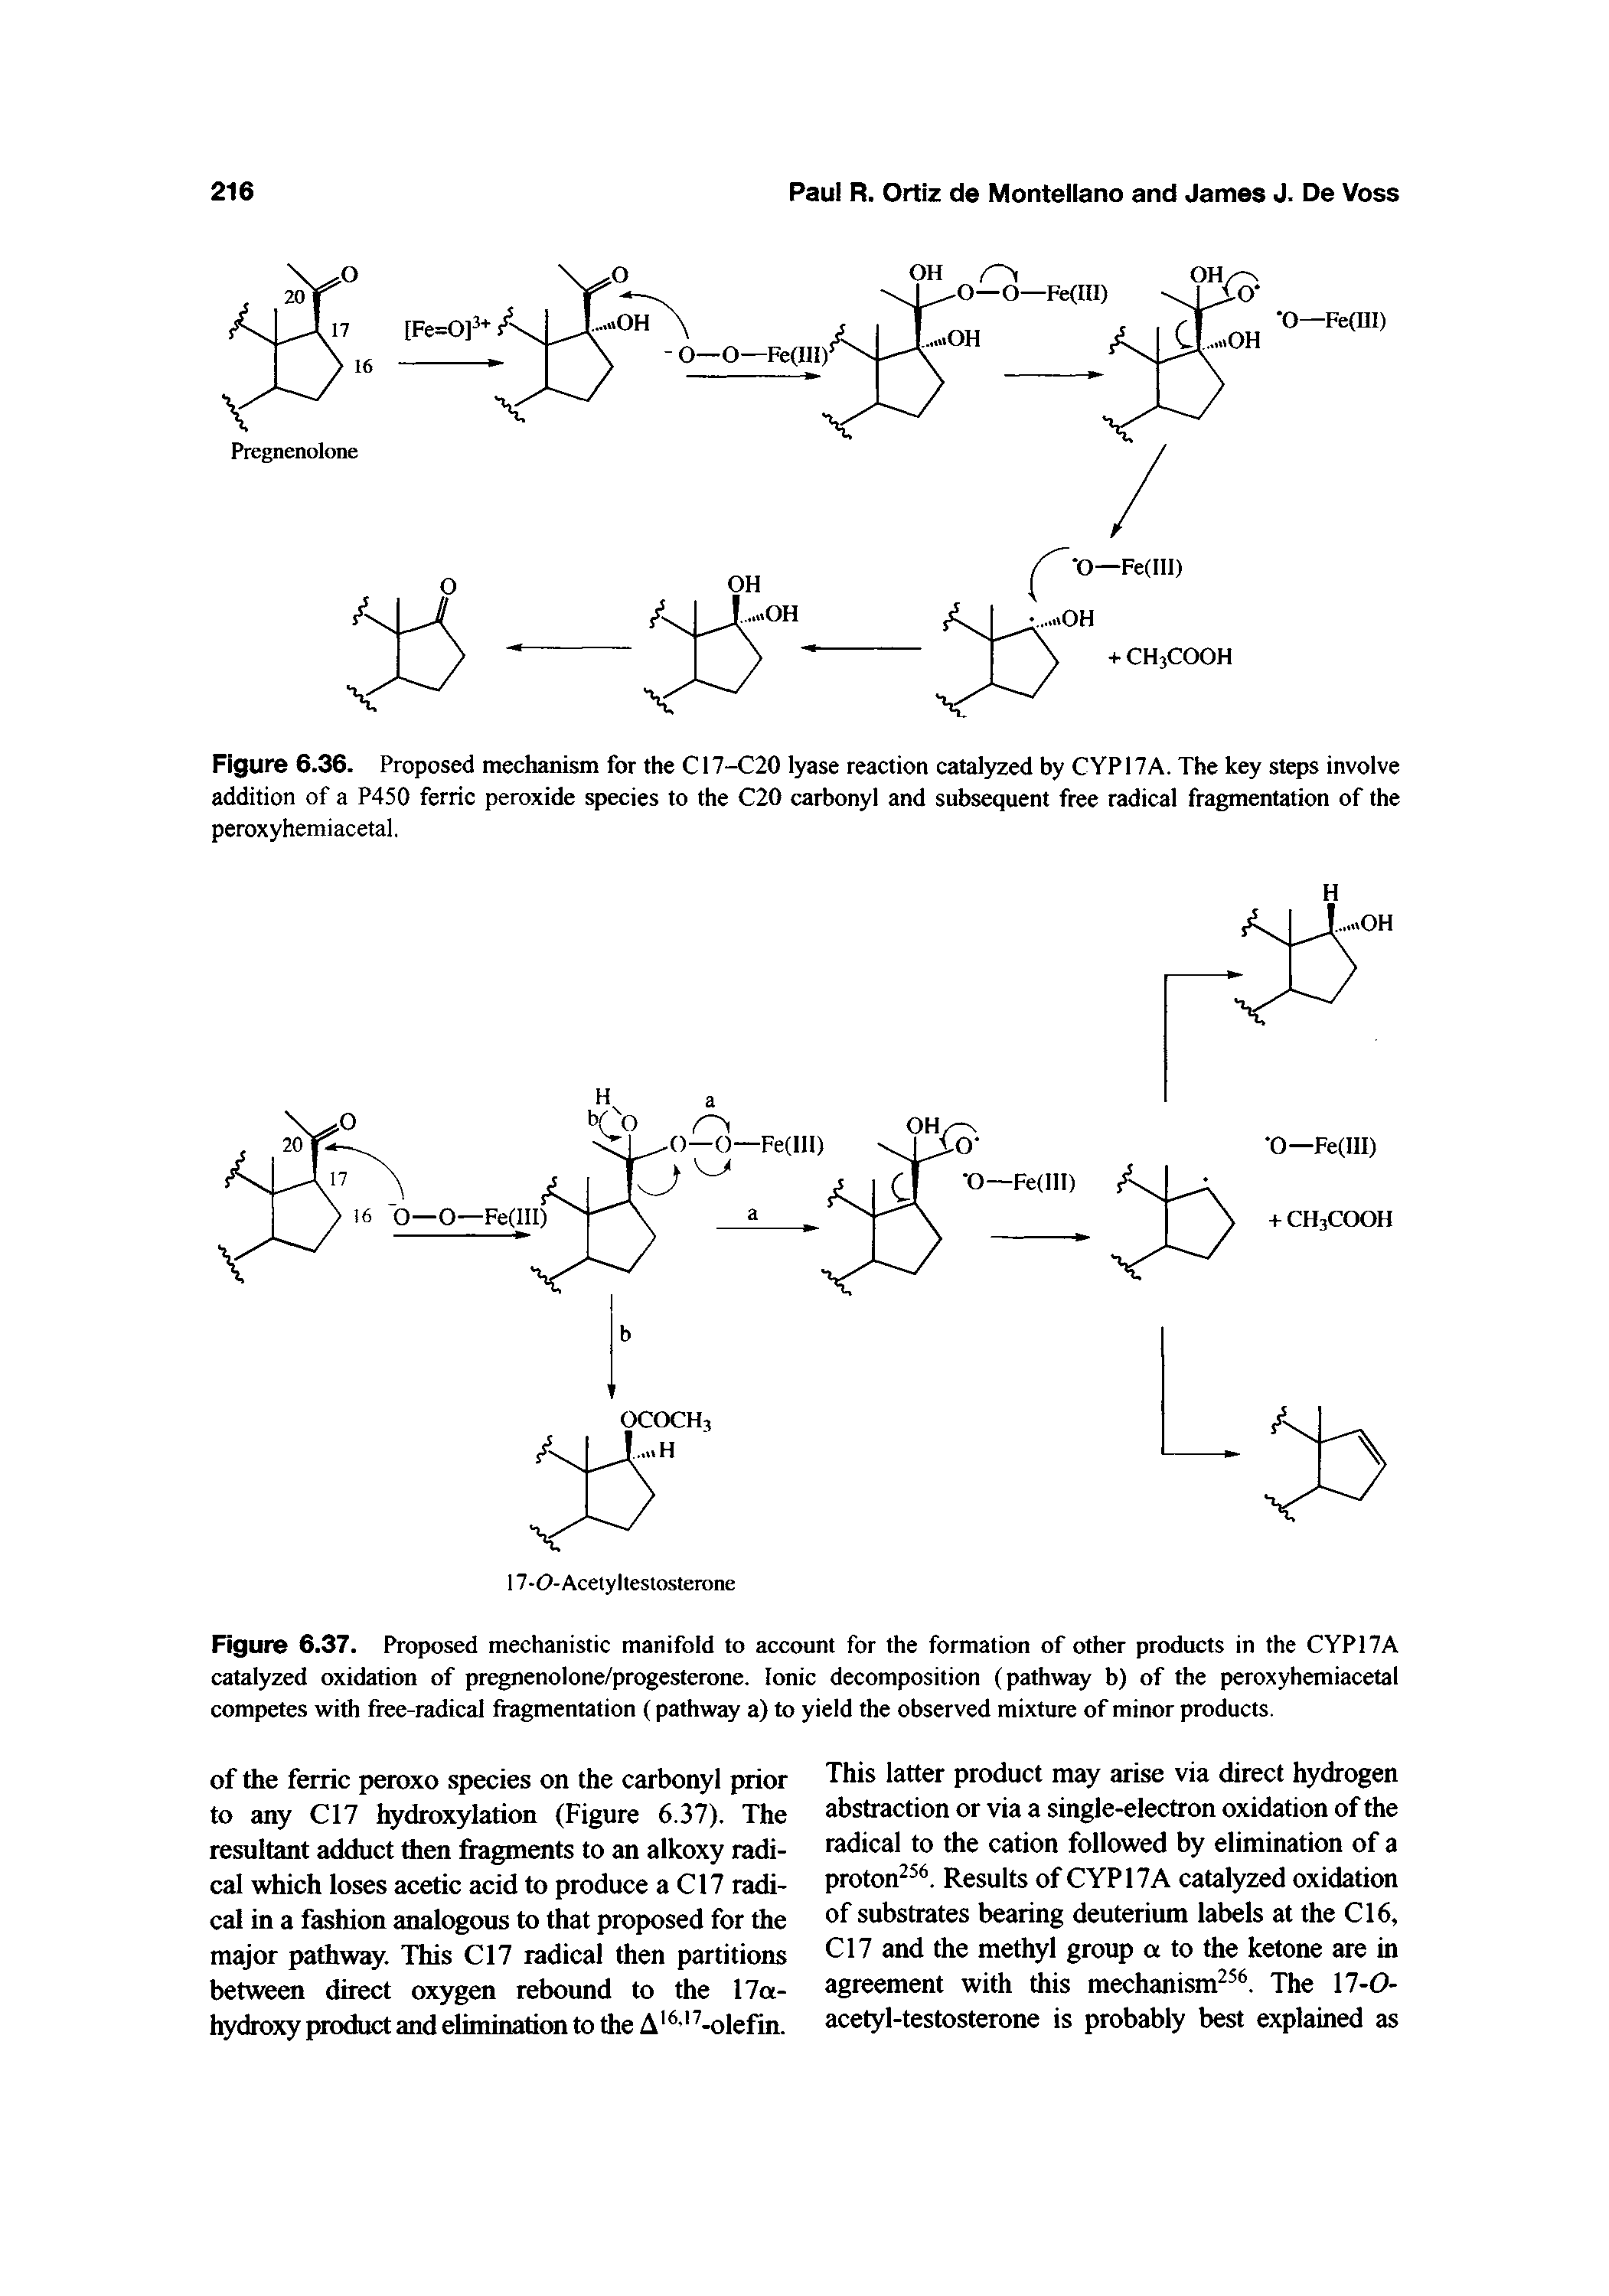 Figure 6.37. Proposed mechanistic manifold to account for the formation of other products in the CYP17A catalyzed oxidation of pregnenolone/progesterone. Ionic decomposition (pathway b) of the peroxyhemiacetal competes with free-radical fragmentation (pathway a) to yield the observed mixture of minor products.